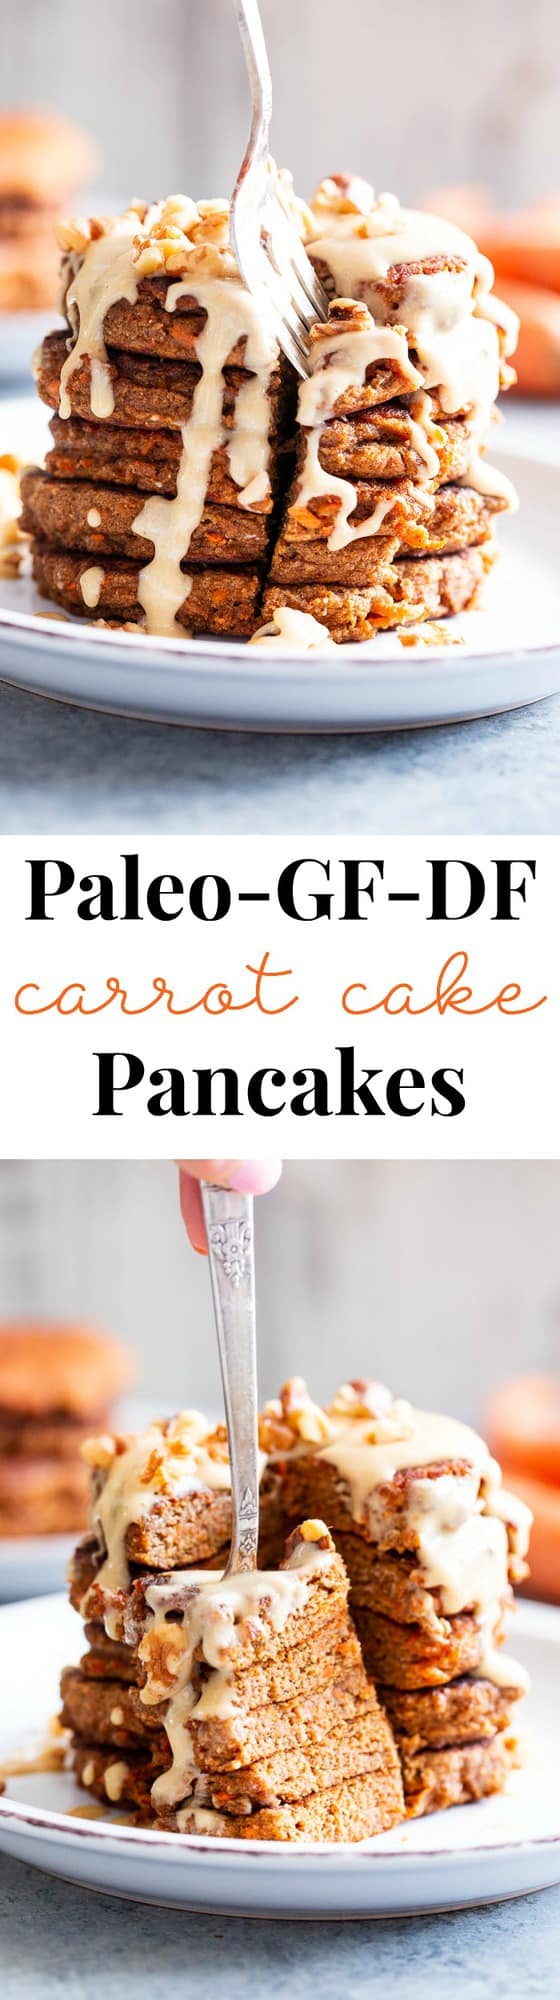 These fluffy, sweet spiced carrot cake pancakes have a dairy-free drizzle that tastes just like a cream cheese icing!  They're made with coconut flour and sweetened with coconut sugar for a healthier take on a Spring breakfast treat.  Gluten-free, dairy-free, refined sugar free, and paleo friendly.